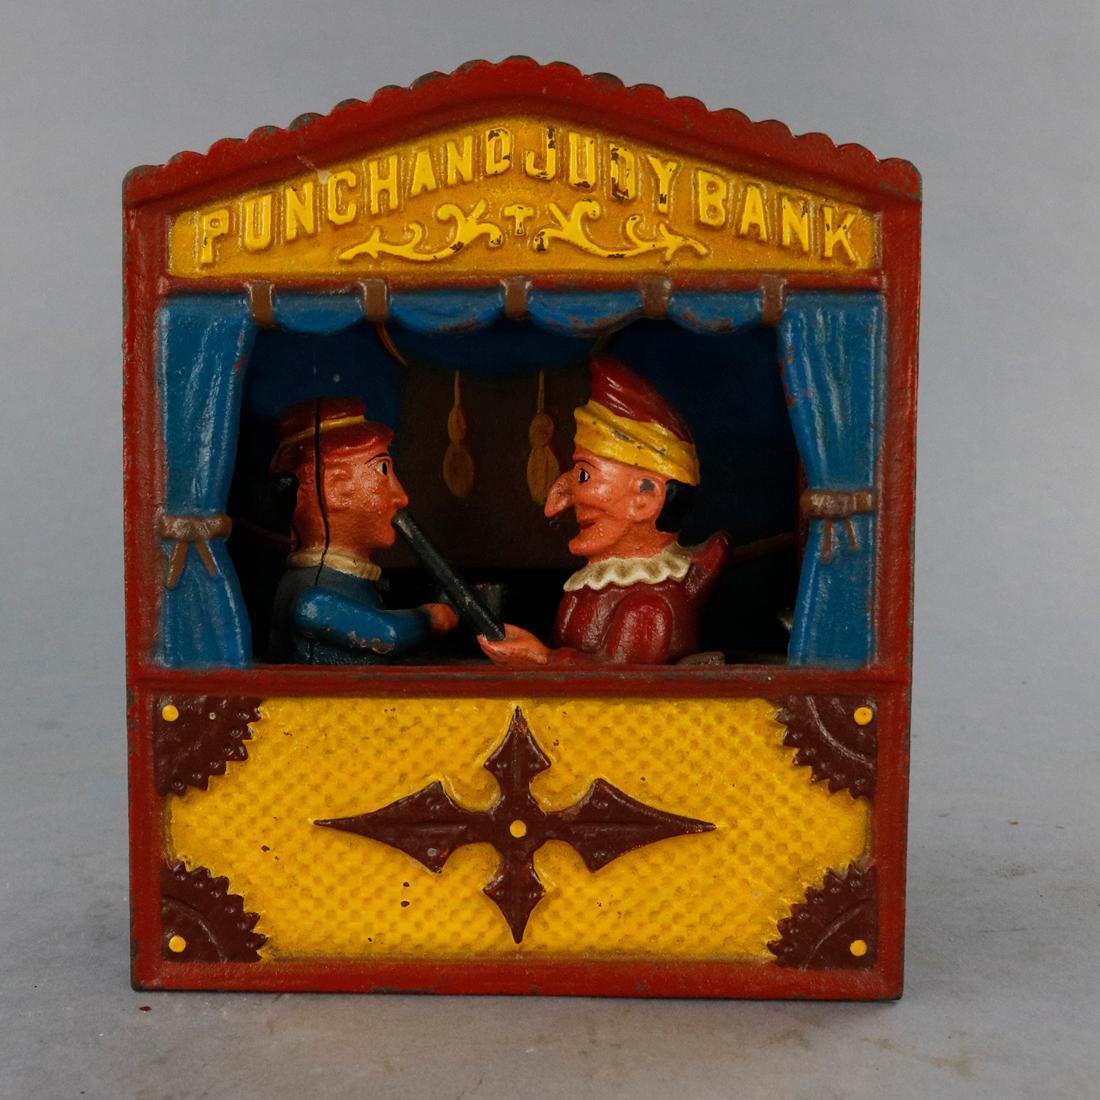 A vintage book of knowledge Punch & Judy mechanical bank offers polychrome cast construction with puppet stage and figures with embossed title, underside reads 